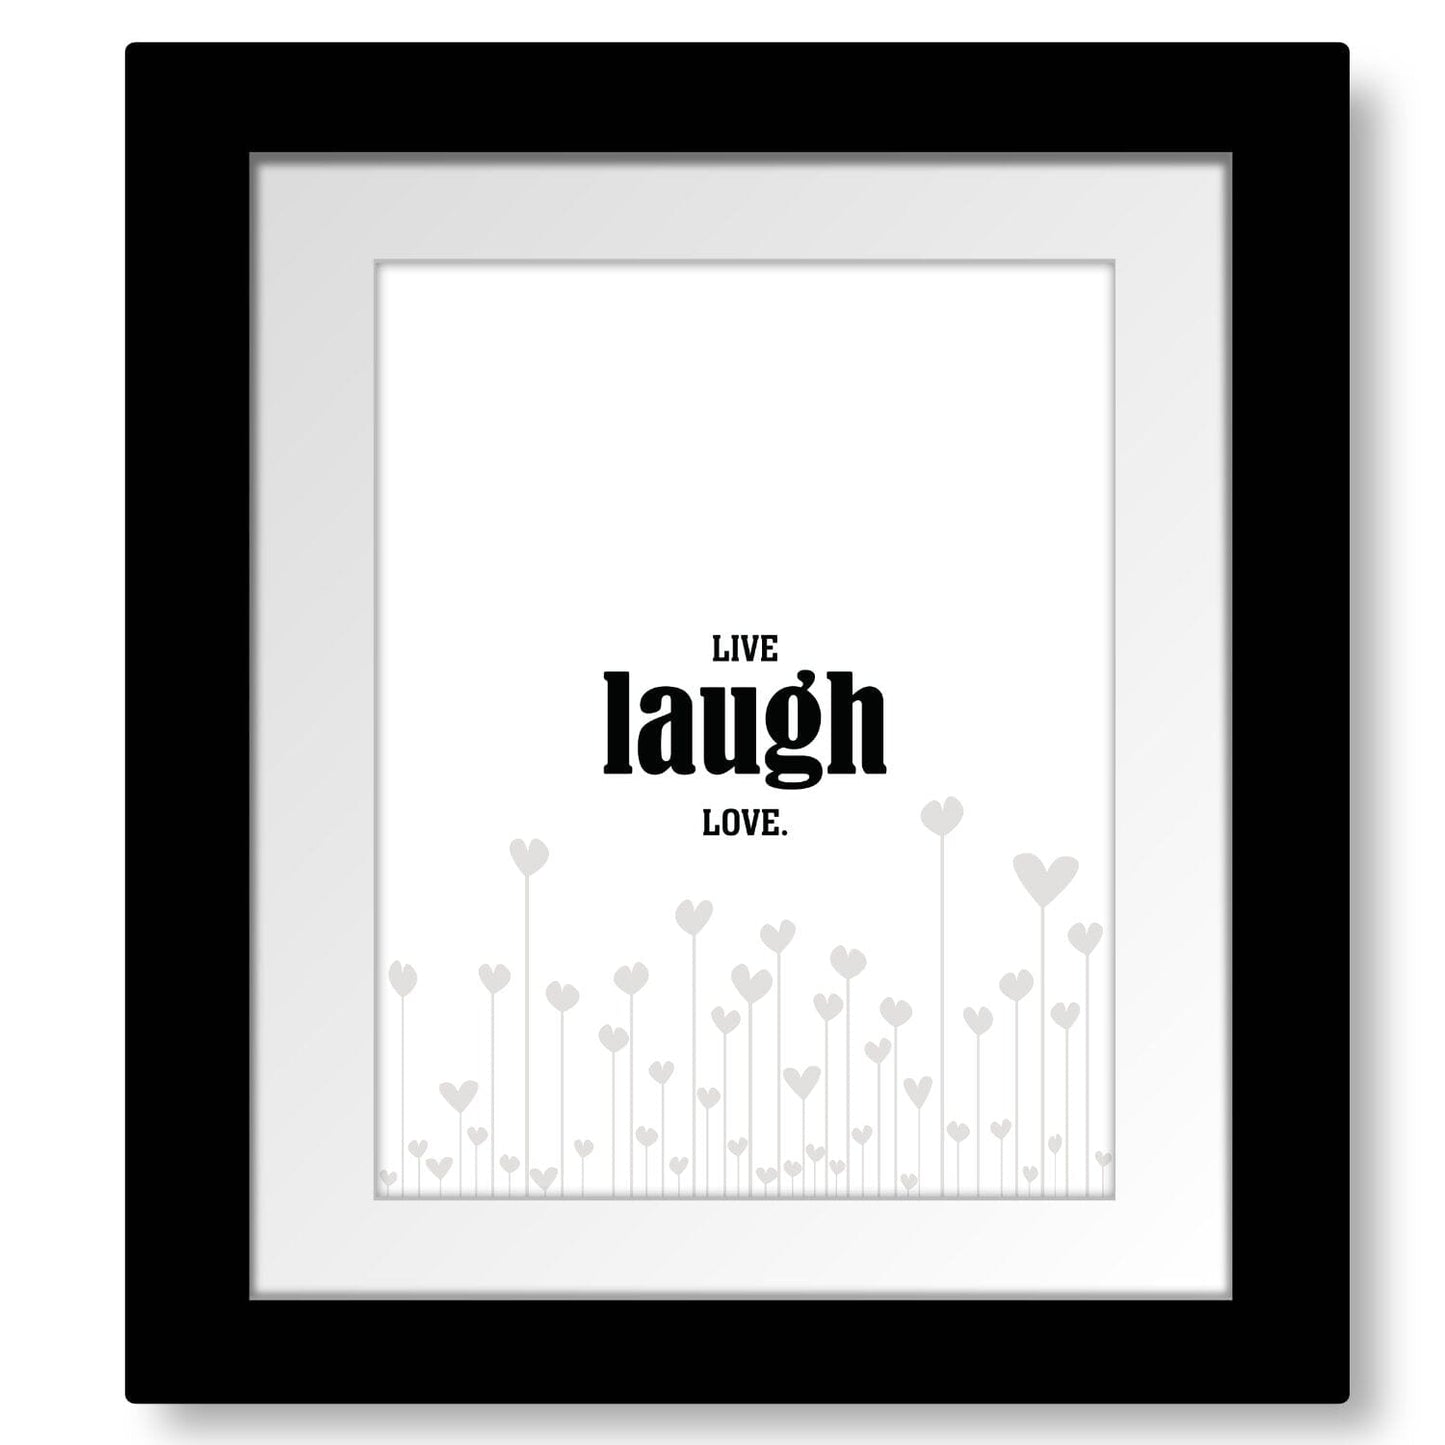 Light-Hearted Wall Art - Live Laugh Love - Wise and Witty Wise and Wiseass Quotes Song Lyrics Art 8x10 Matted and Framed Print 